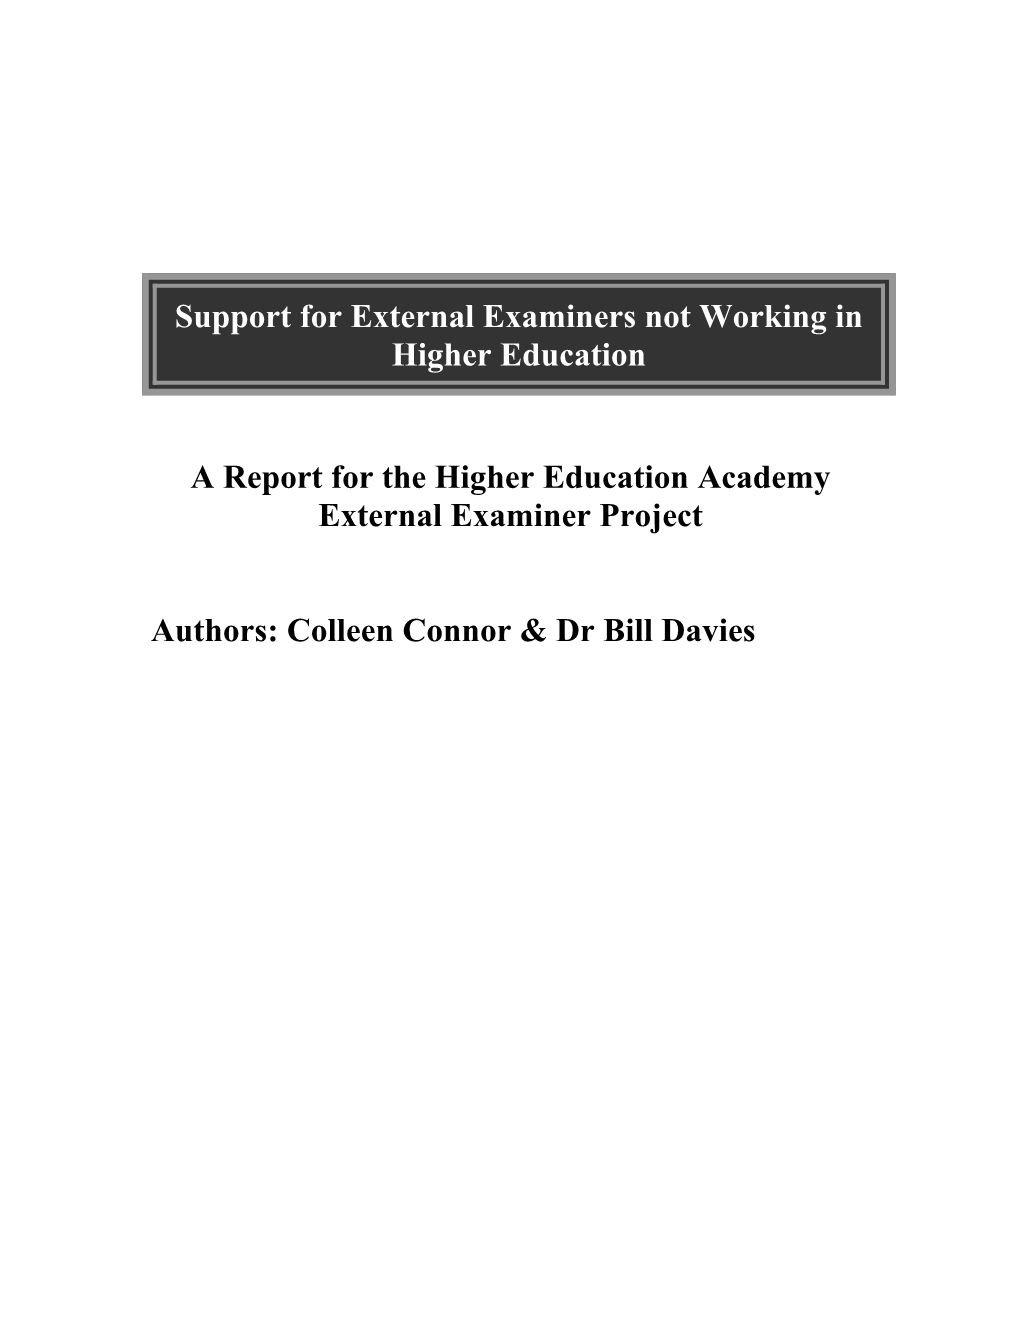 A Report for the Higher Educationacademy External Examiner Project